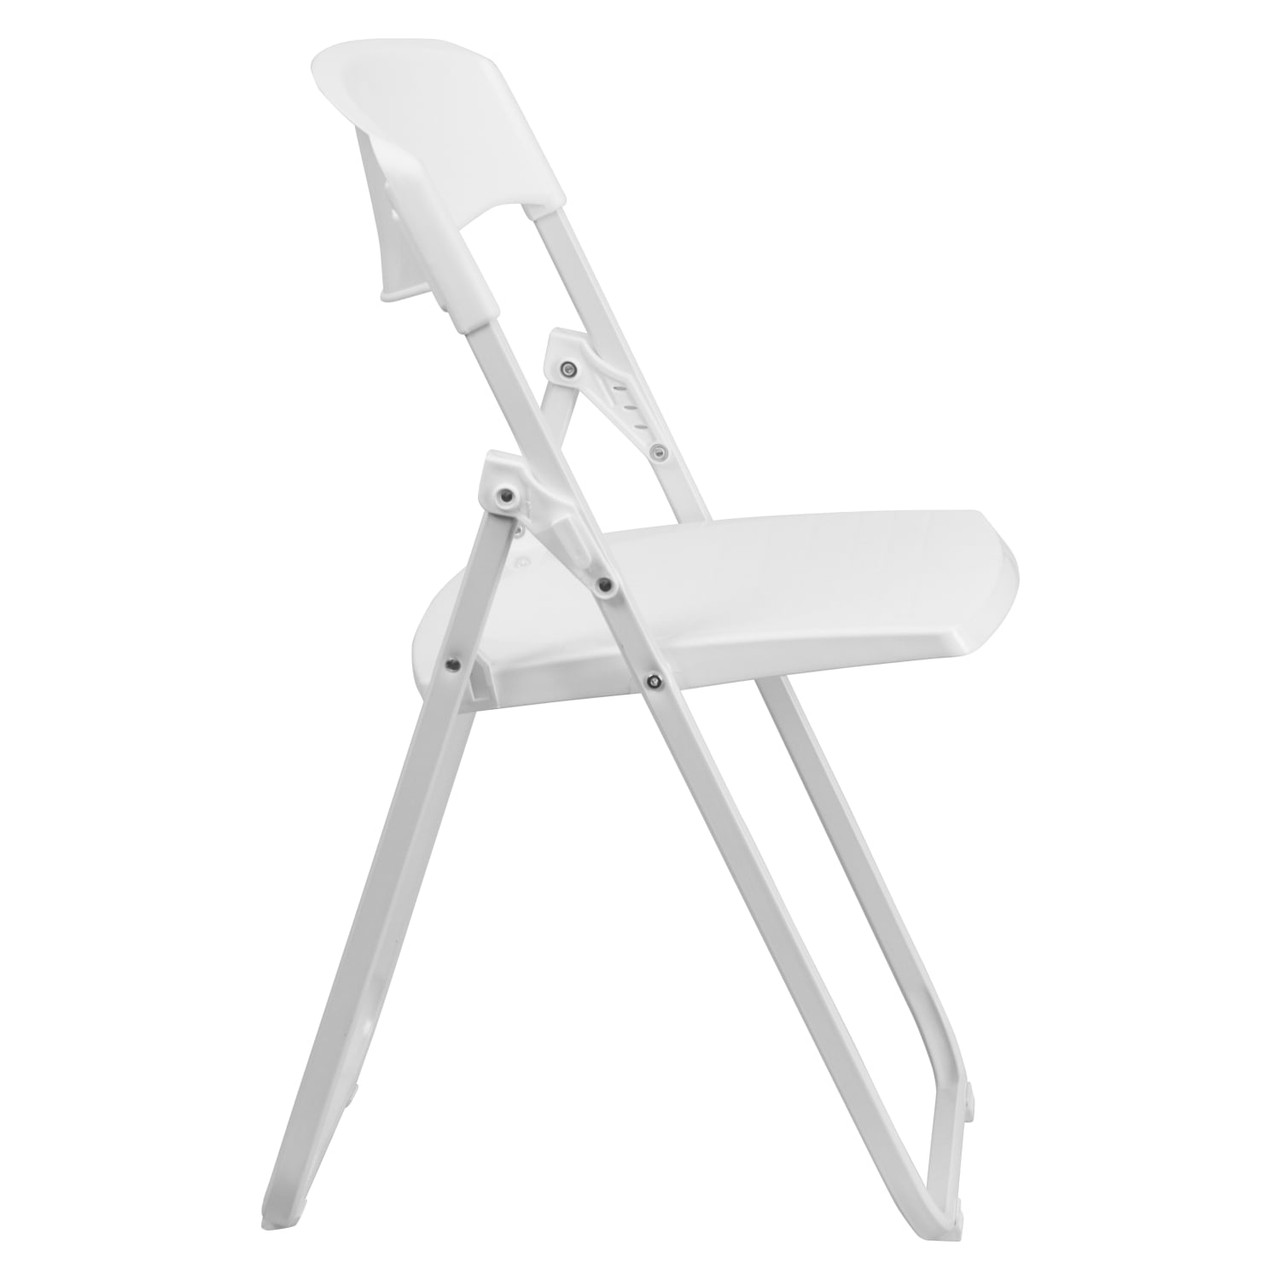 6 Pack Hercules  Capacity Heavy Duty White Plastic Folding Chair with Built-in Ganging Brackets